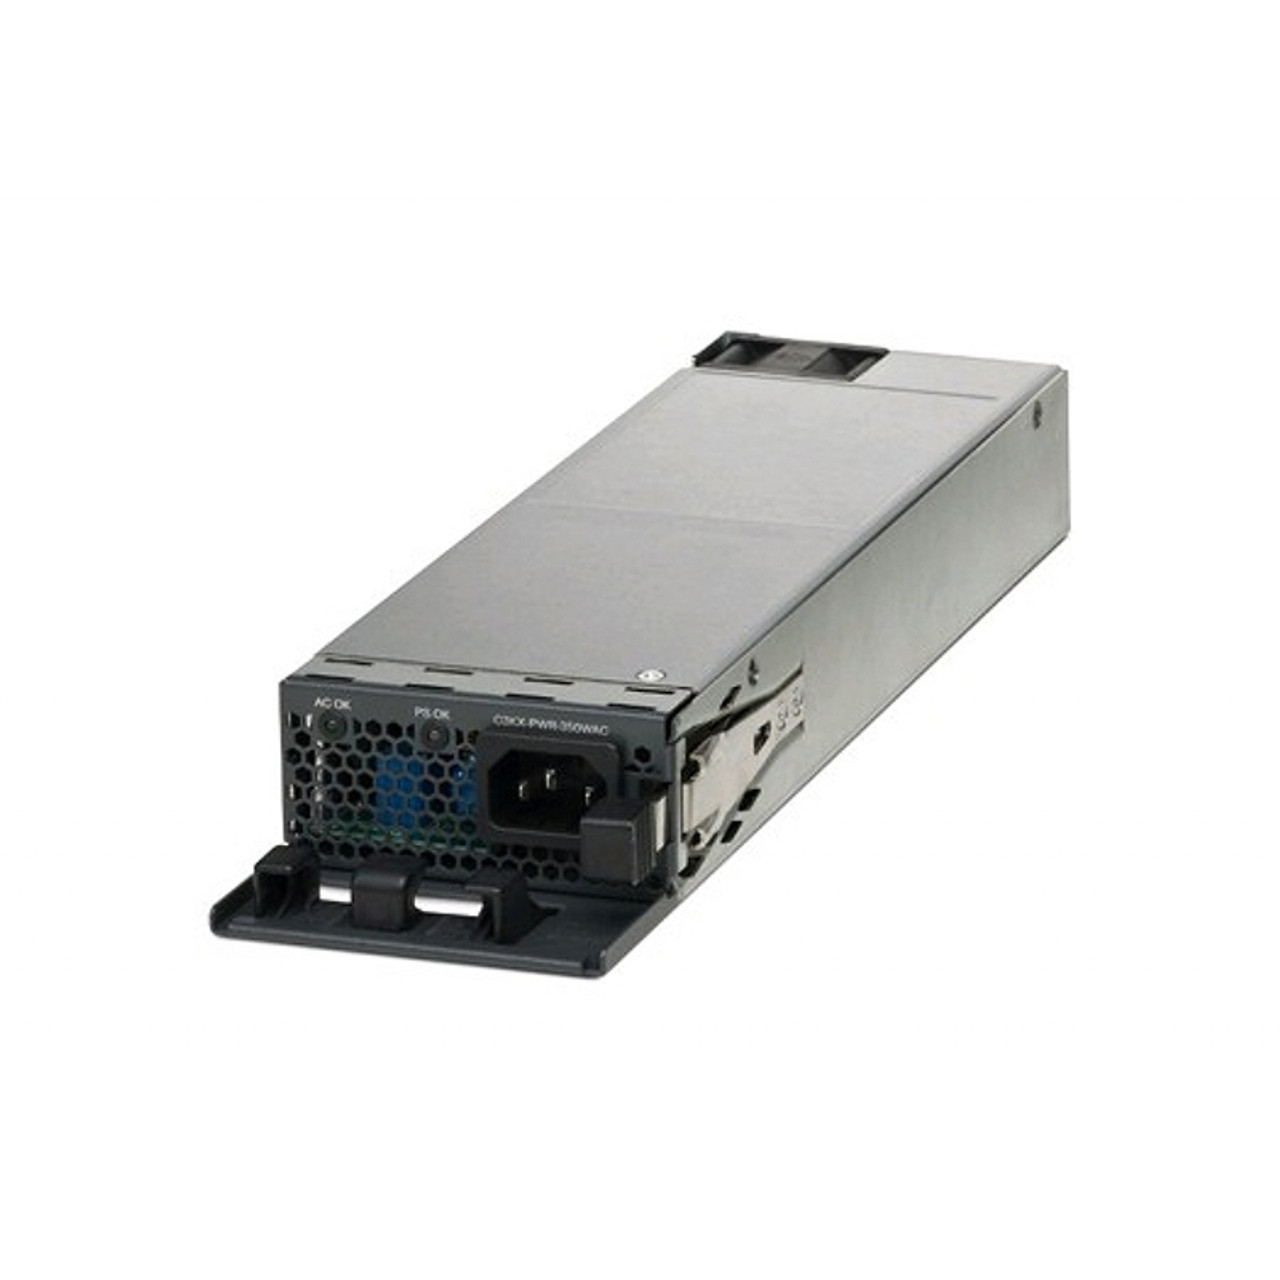 PWR-4330-POE-AC - Cisco AC POWER SUPPLY WITH POE FOR CISCO ISR 4330